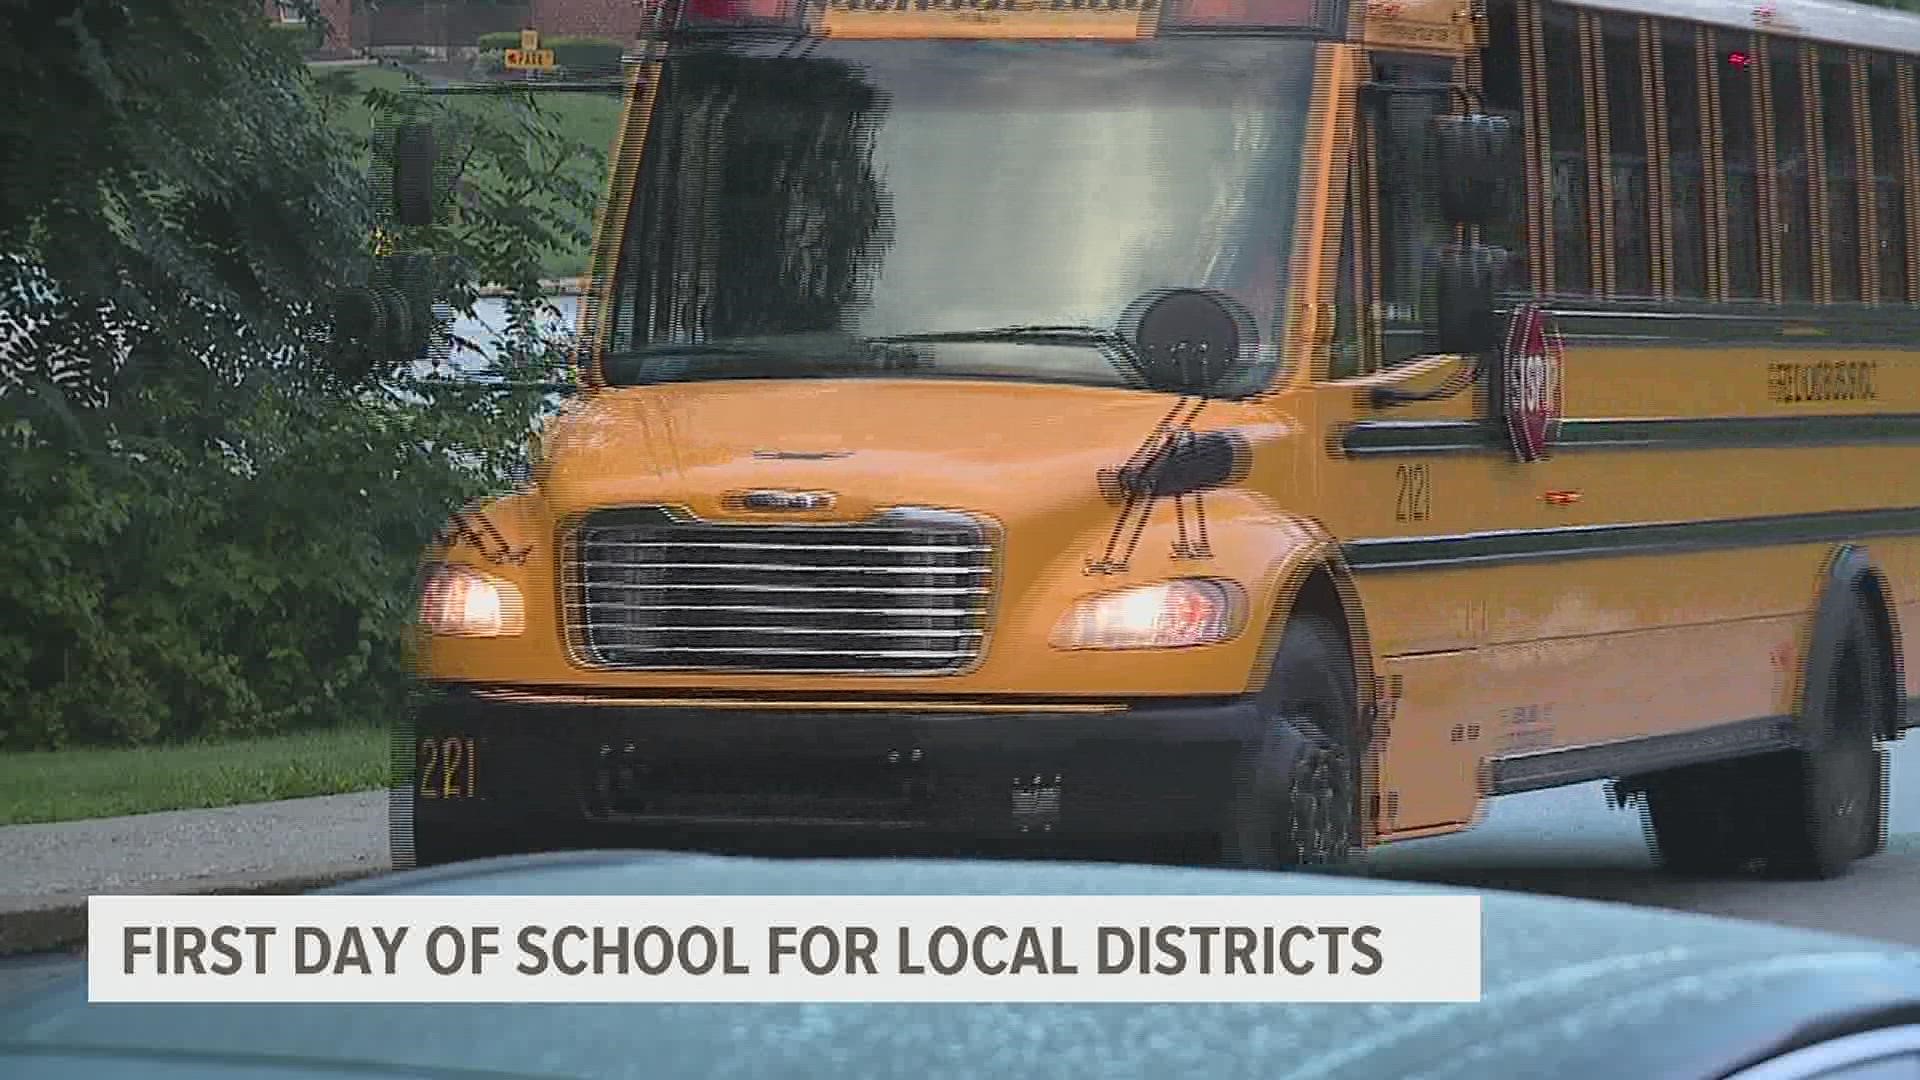 Students across South Central Pa. are saying goodbye to summer and hello to the first day of school, and with that comes new health and safety guidelines.